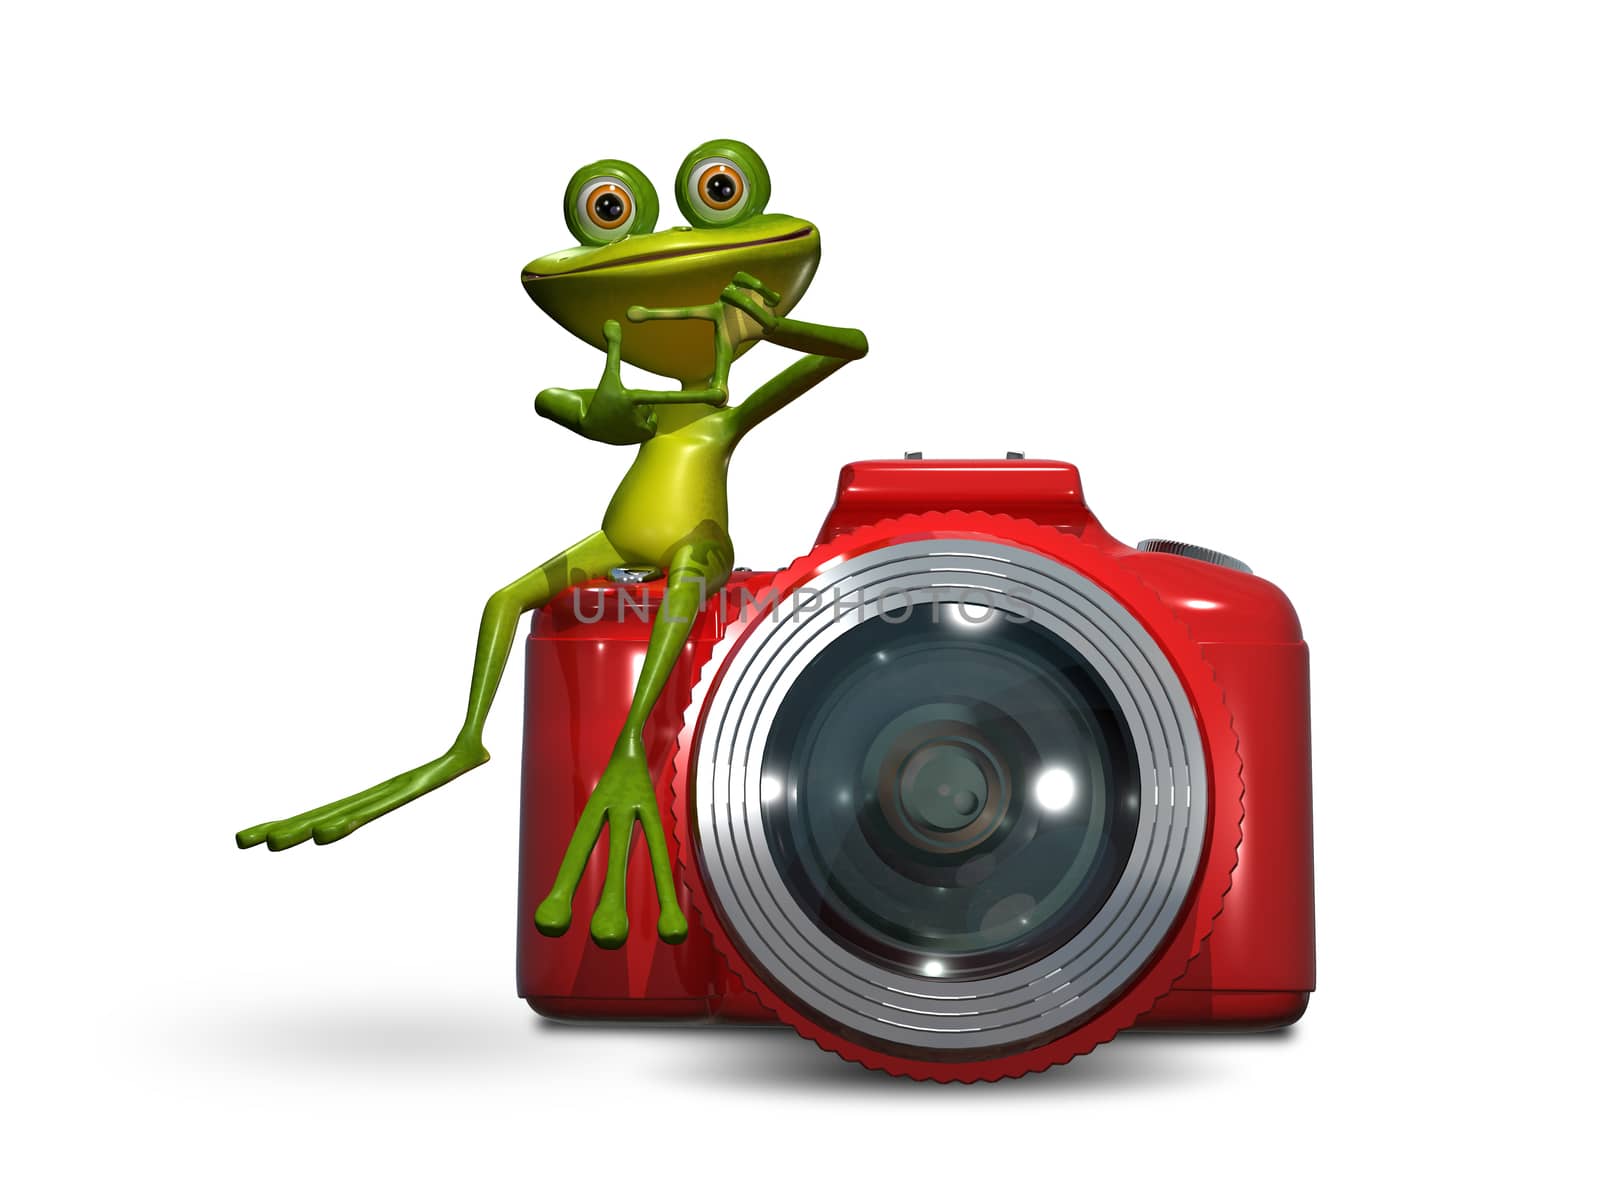 Illustration of green frog on a red camera